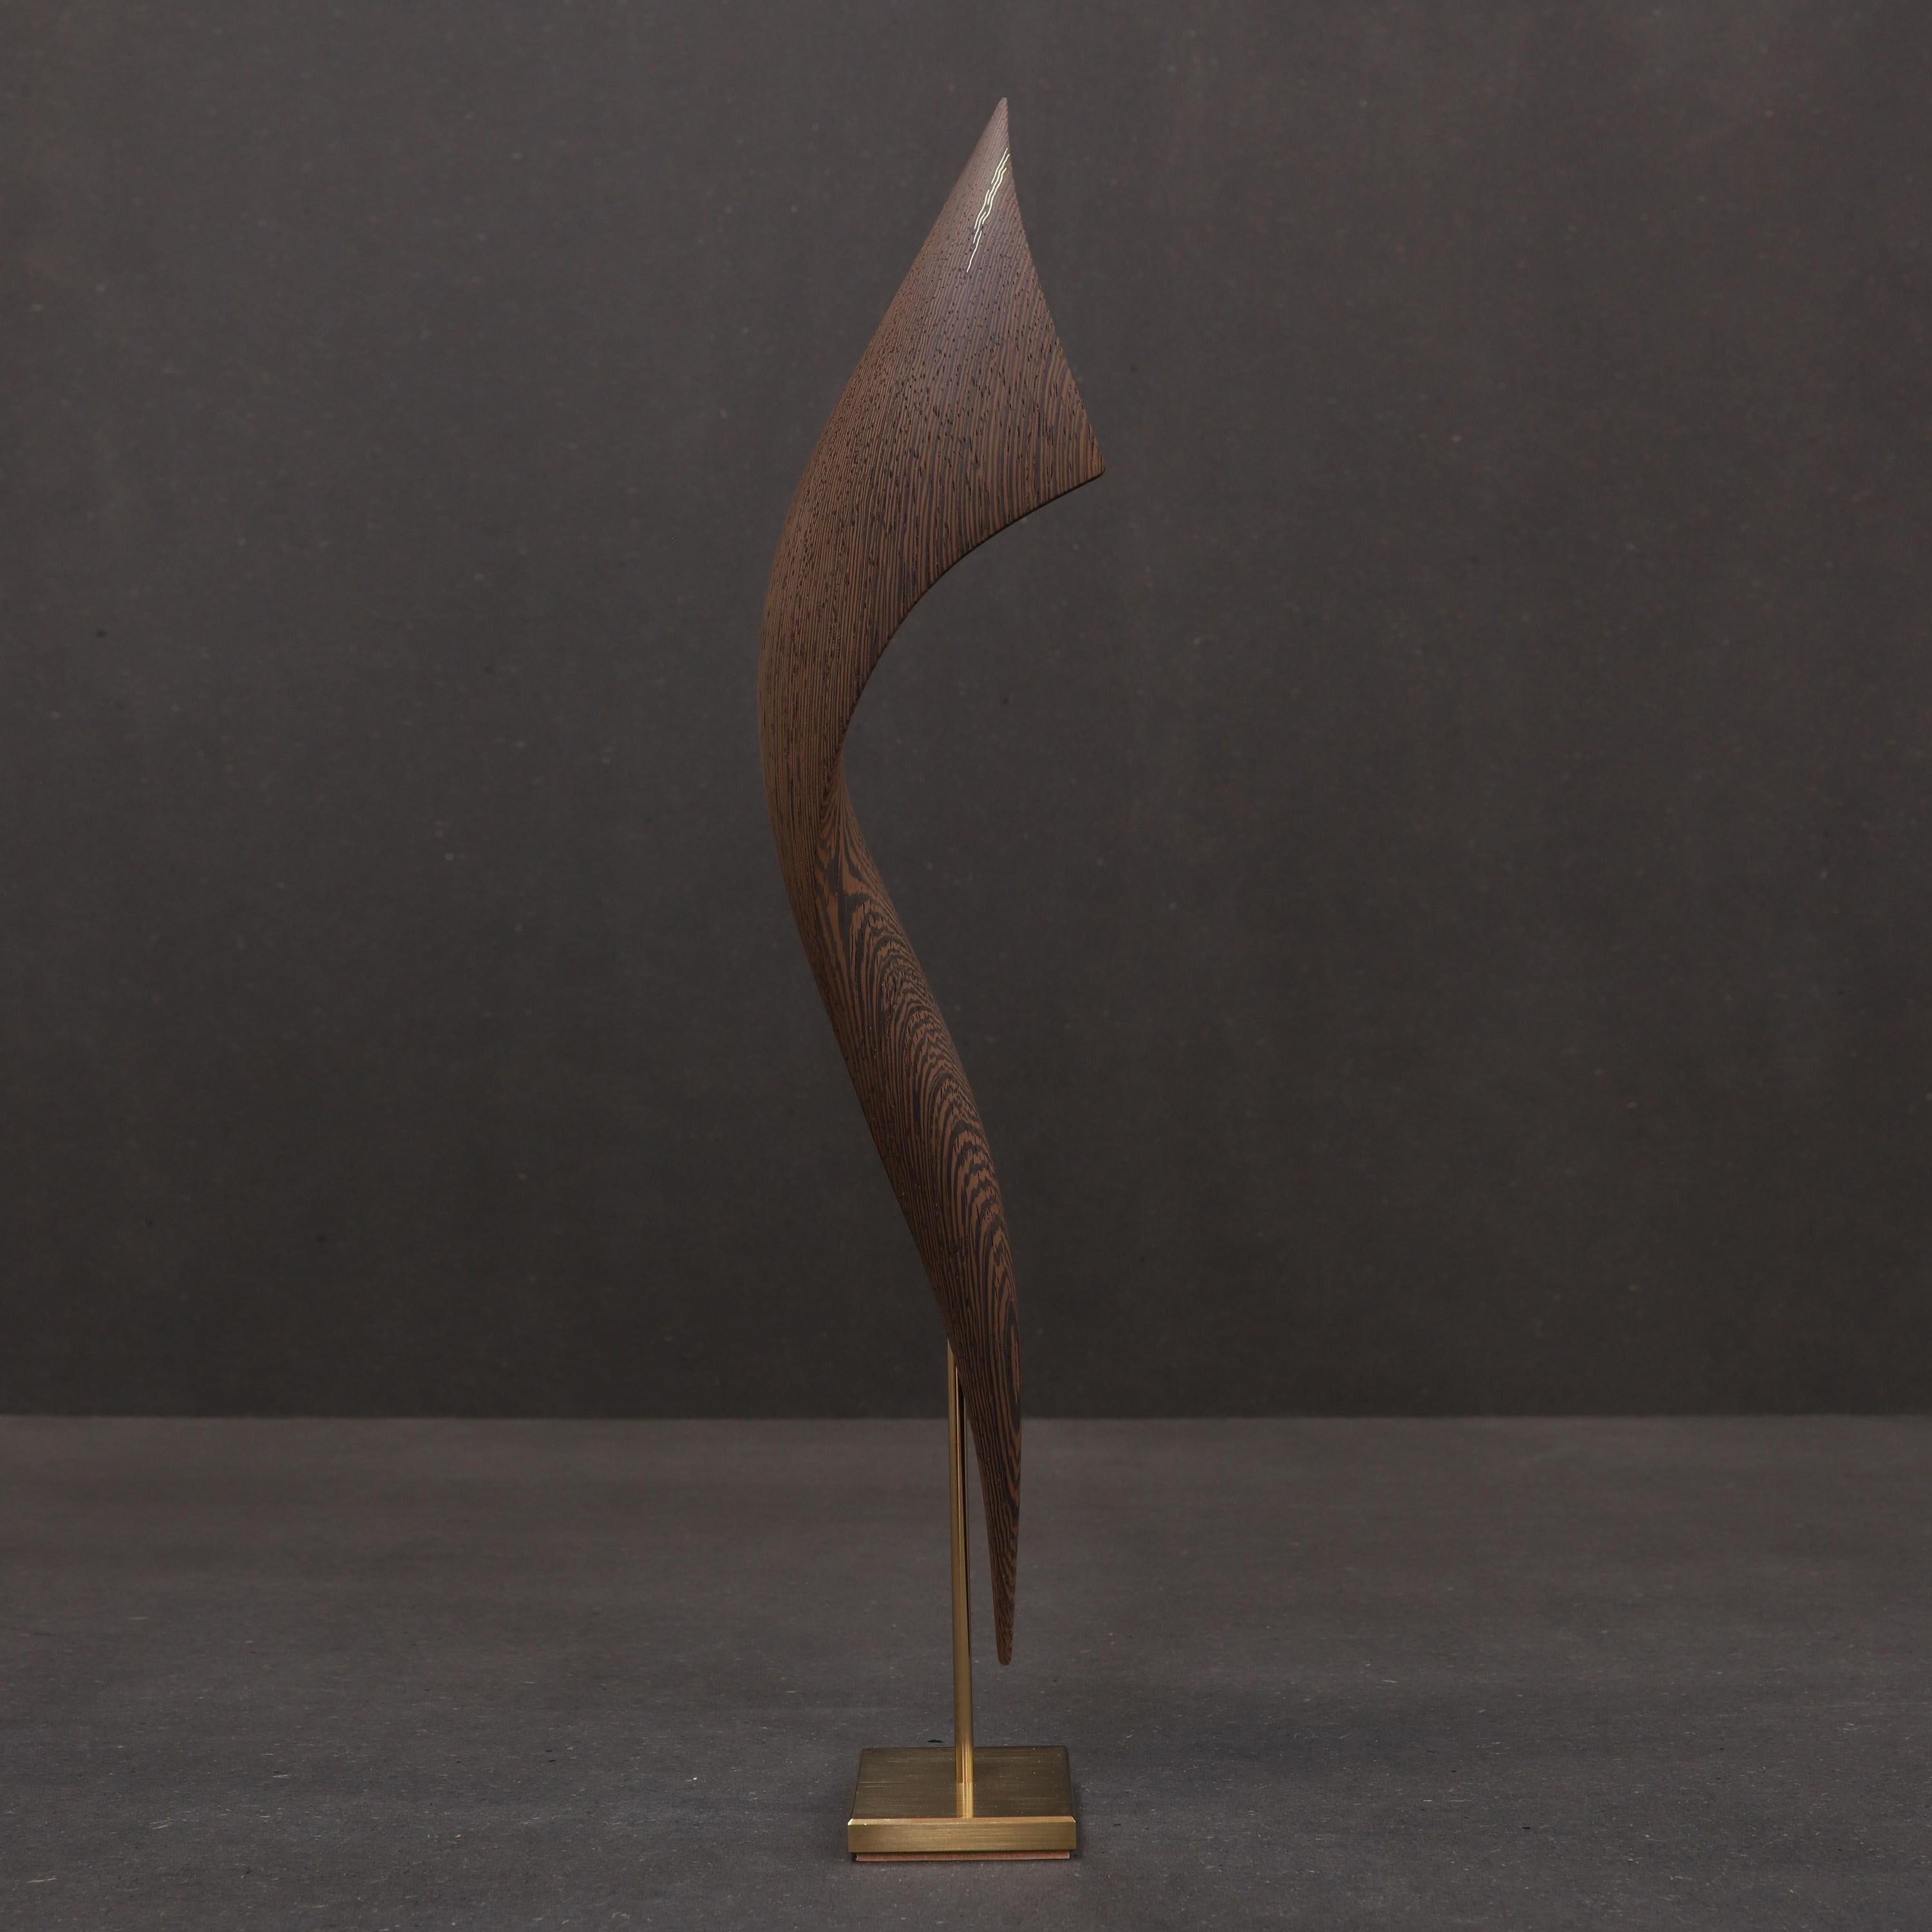  Flow Petit No 20, abstract fluid Wenge wood & gold mounted sculpture by Egeværk For Sale 1